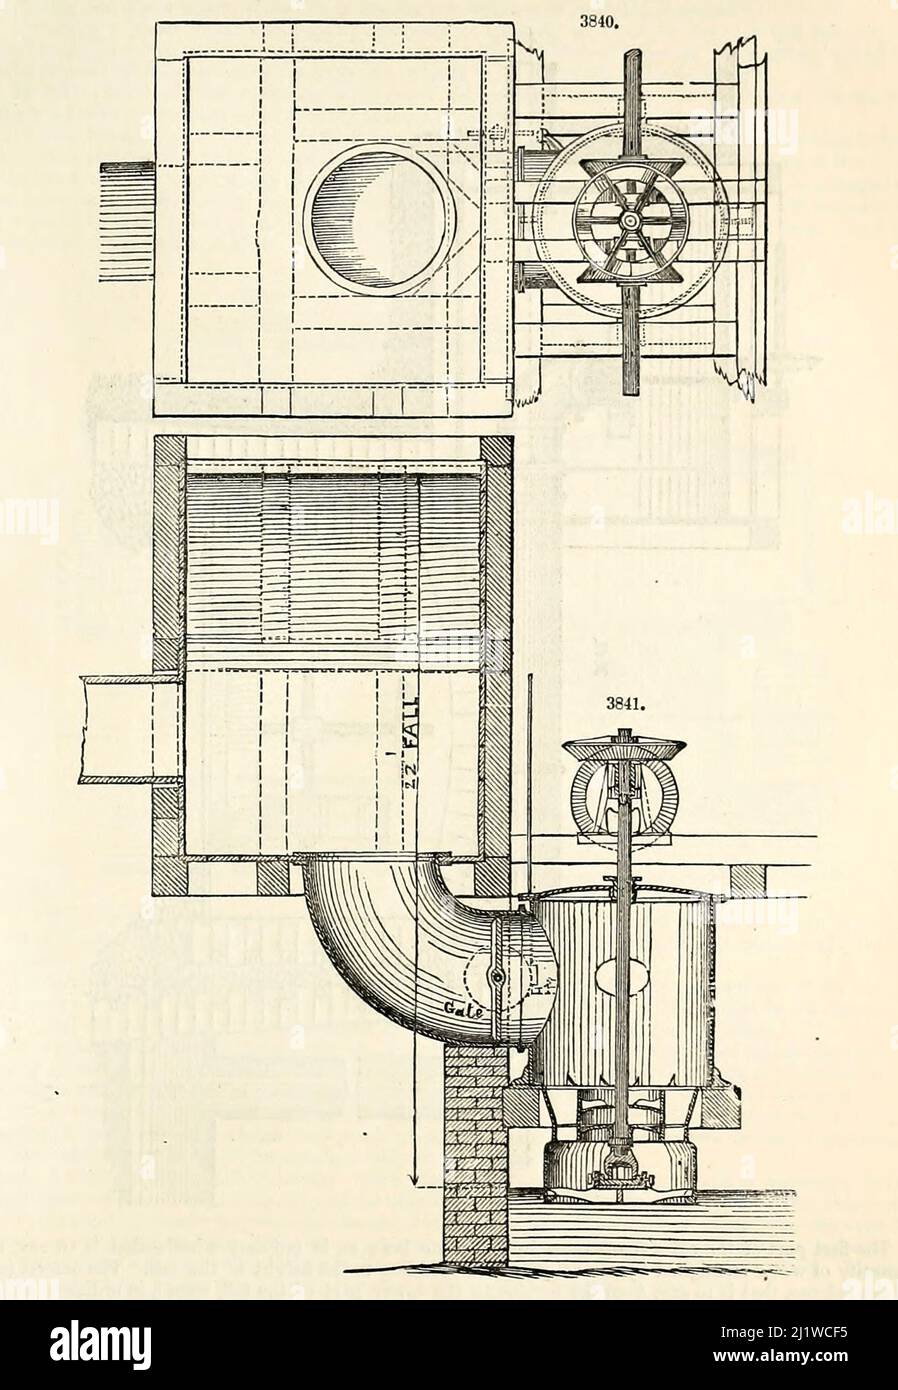 from Appleton's dictionary of machines, mechanics, engine-work, and engineering : illustrated with four thousand engravings on wood ; in two volumes by D. Appleton and Company Published New York : D. Appleton and Co 1873 Stock Photo